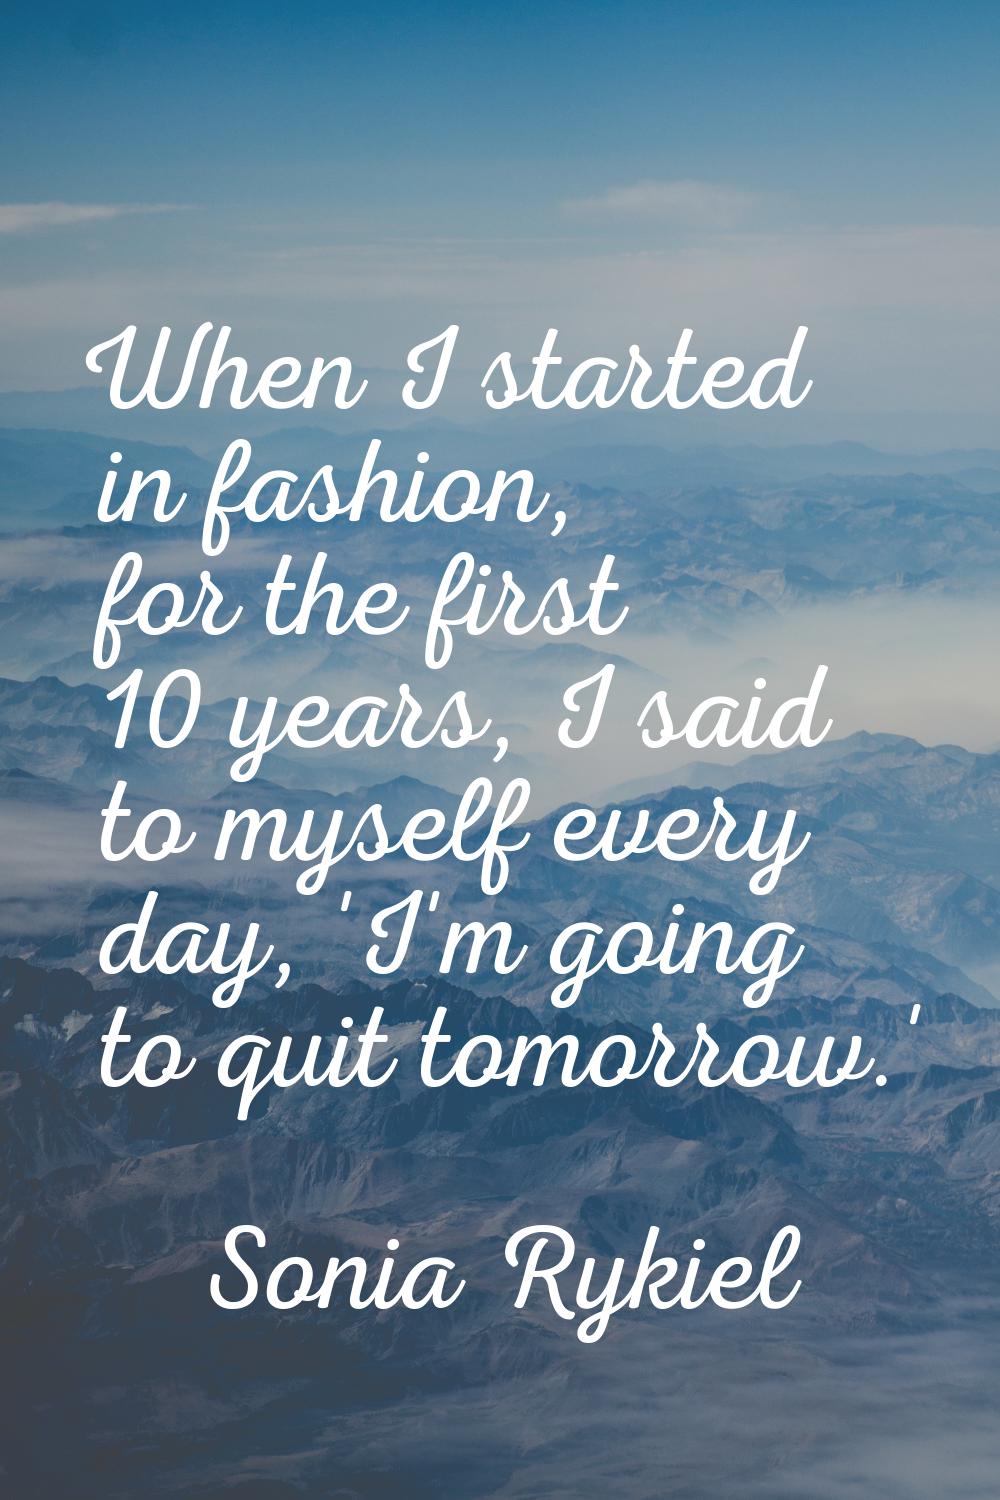 When I started in fashion, for the first 10 years, I said to myself every day, 'I'm going to quit t